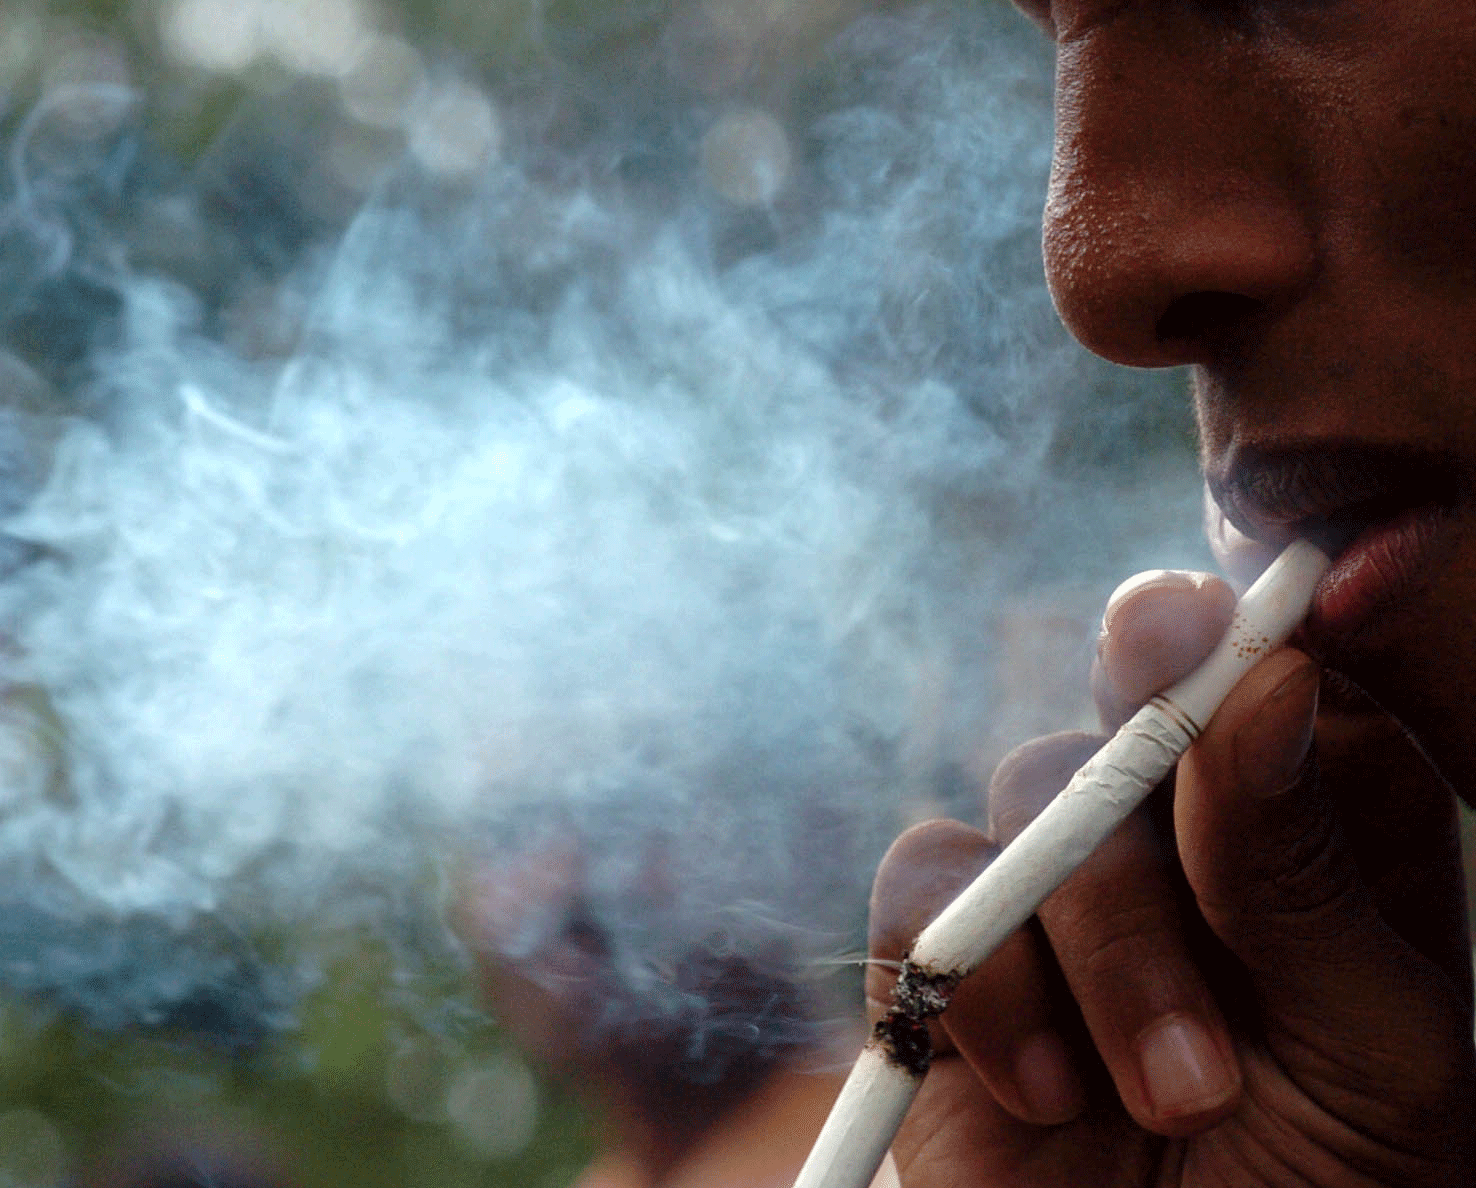 The Central government has proposed stopping the sale of loose cigarettes, a five-fold hike in fine for smoking in public places, and doing away with designated smoking places in hotels and restaurants, as the anti-tobacco legislation is set for an overhaul. DH file photo